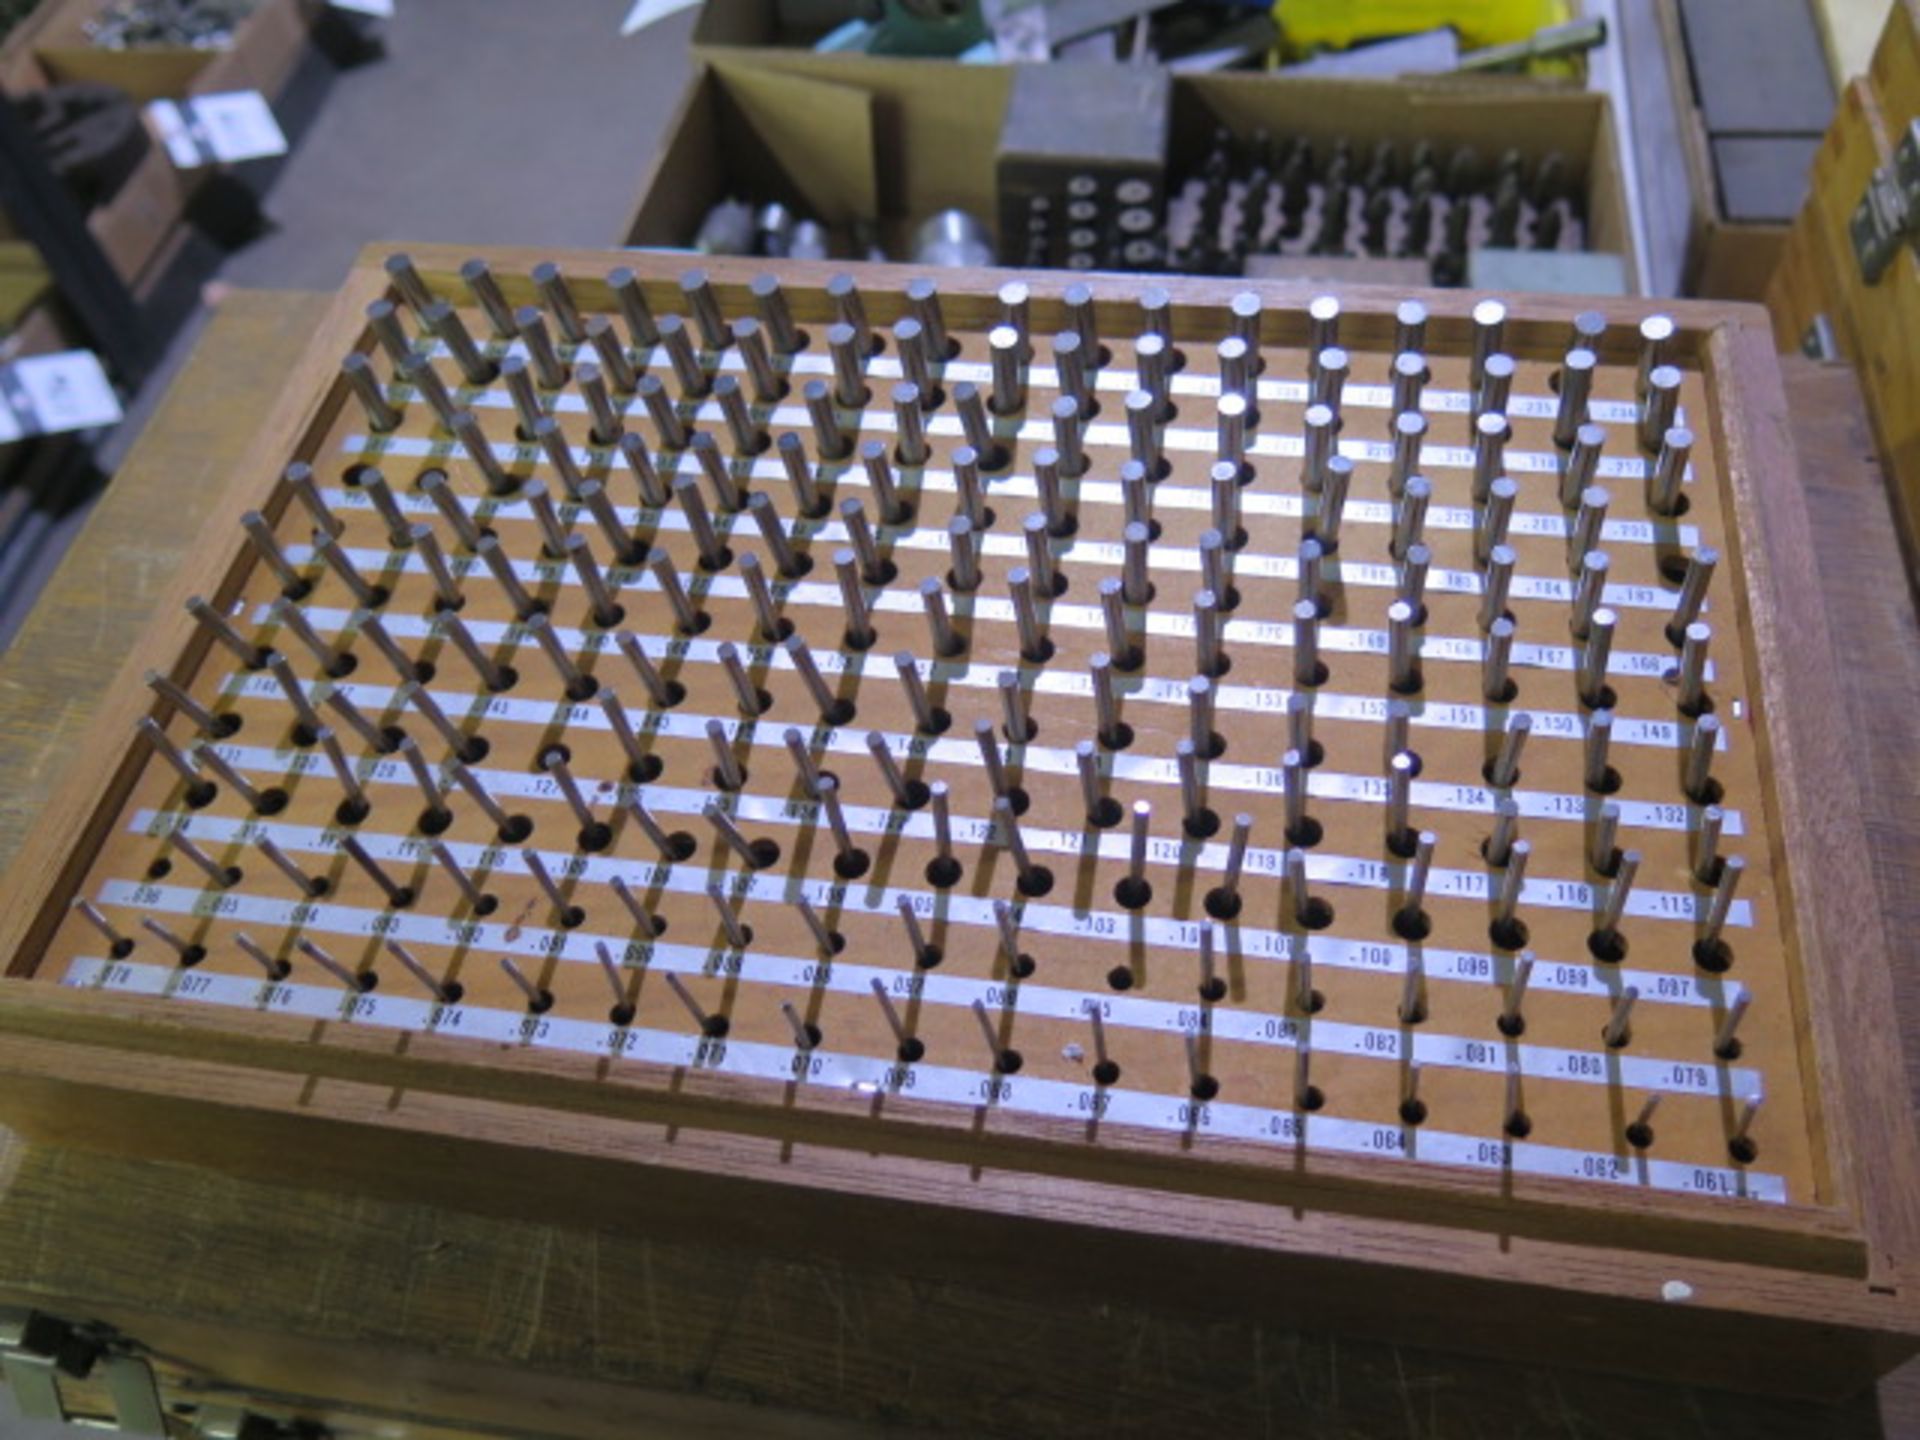 Pin Gage Sets to 1.000" (NOT COMPLETE) - Image 8 of 8